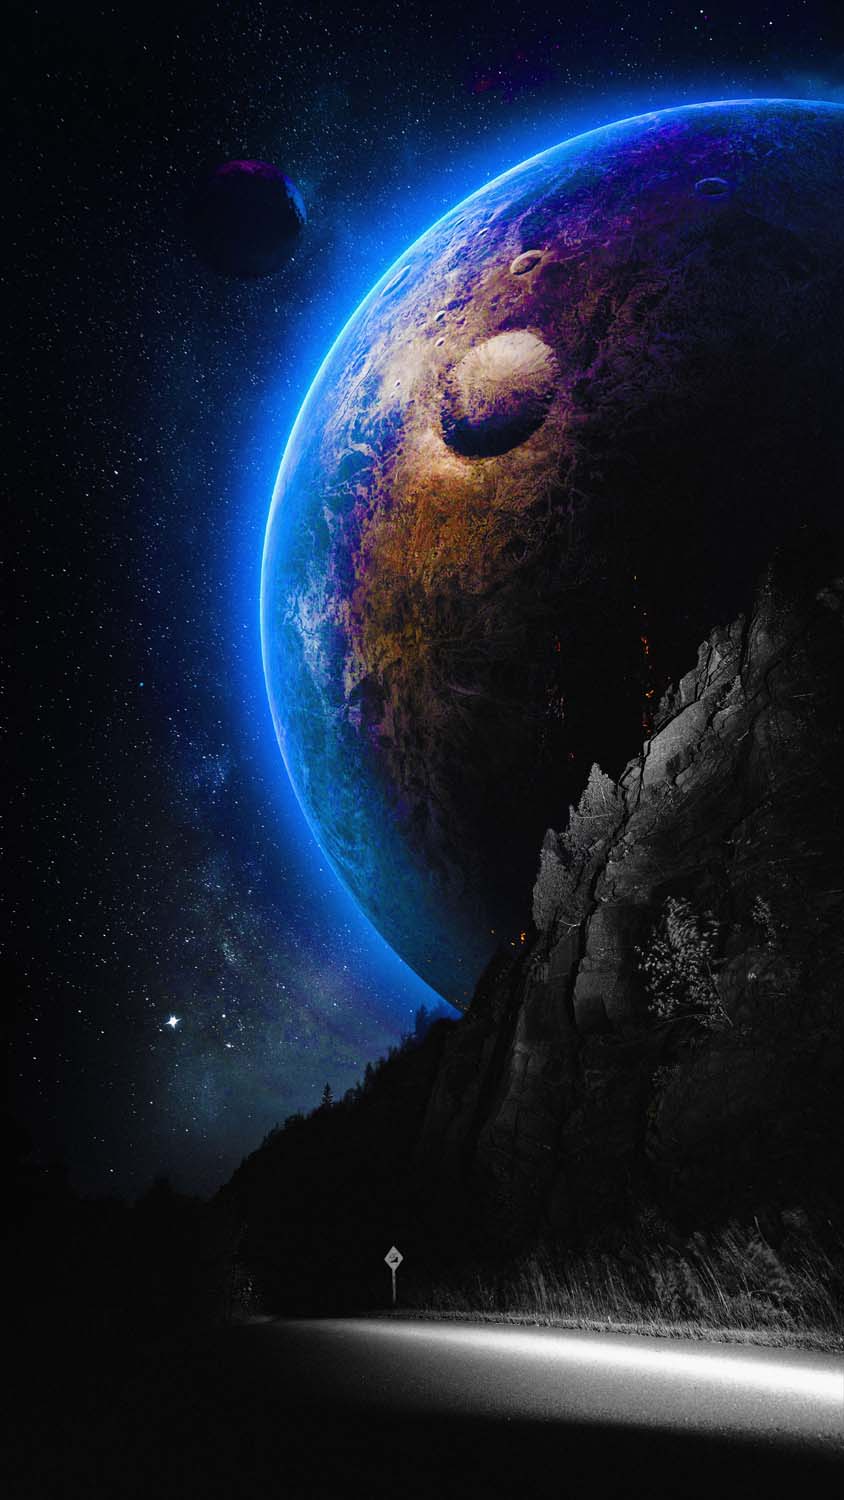 Future Earth IPhone Wallpaper HD - IPhone Wallpapers : iPhone Wallpapers